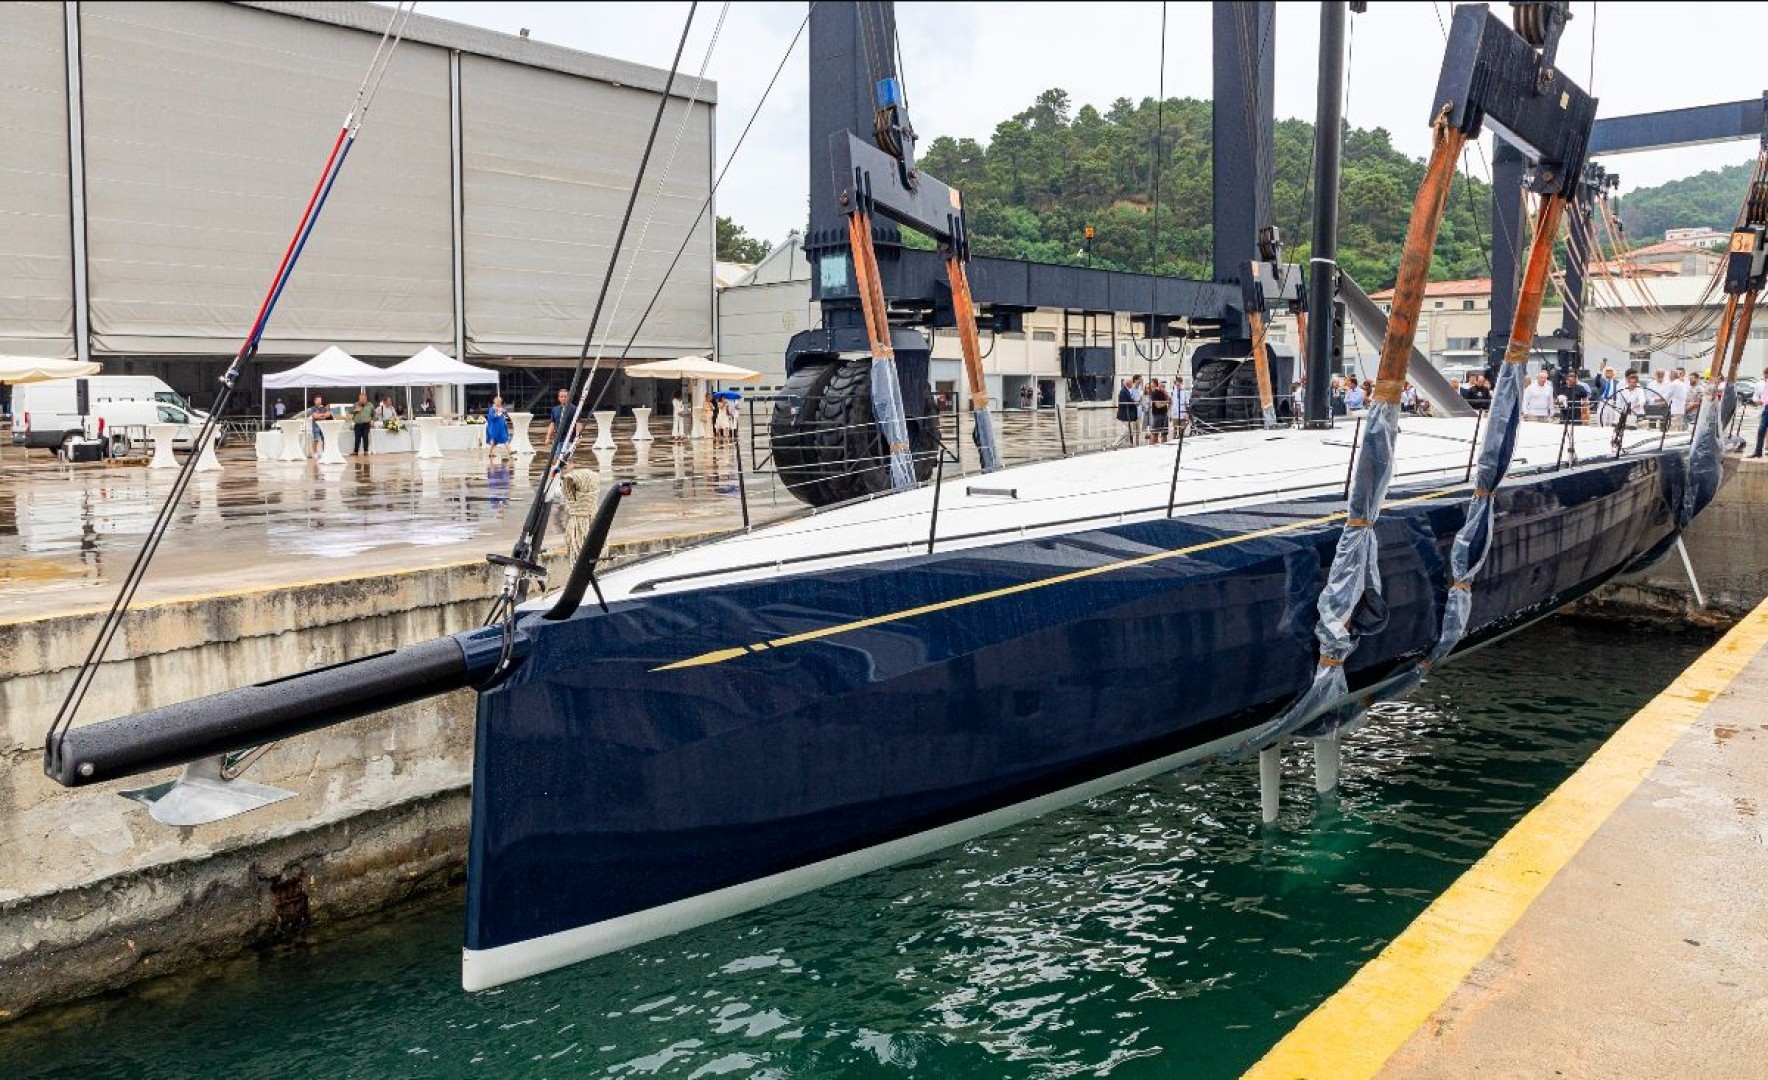 The ClubSwan 80 built by Persico Marine is launched in La Spezia